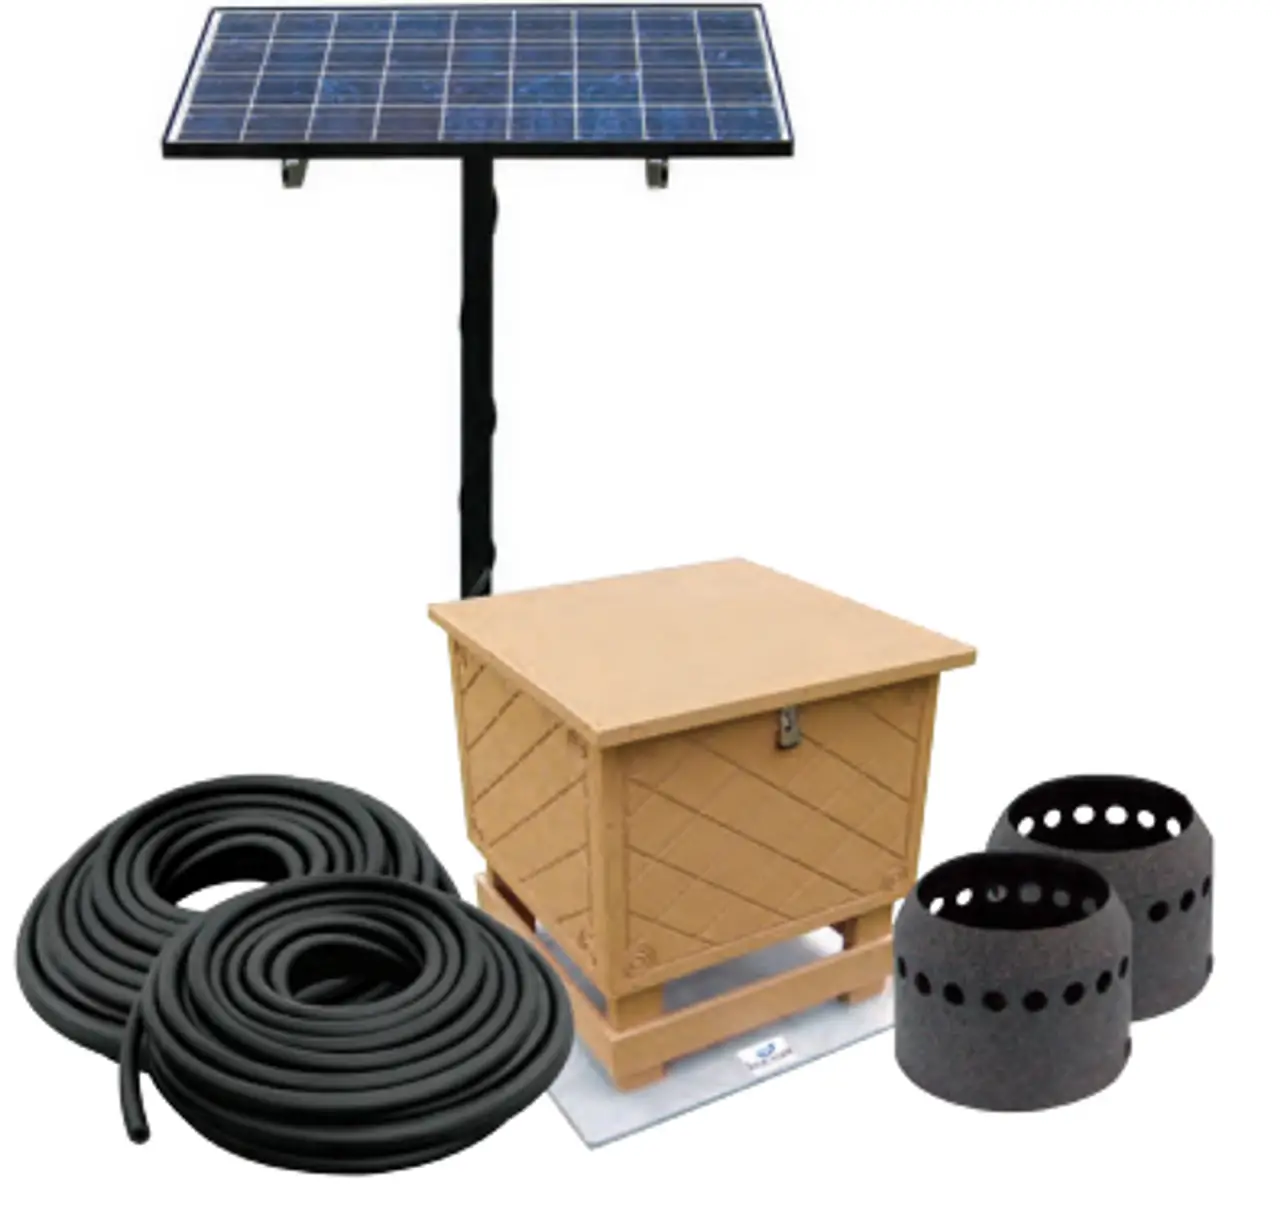 Keeton Solaer Solar Pond Aerator and Pond Aeration Systems